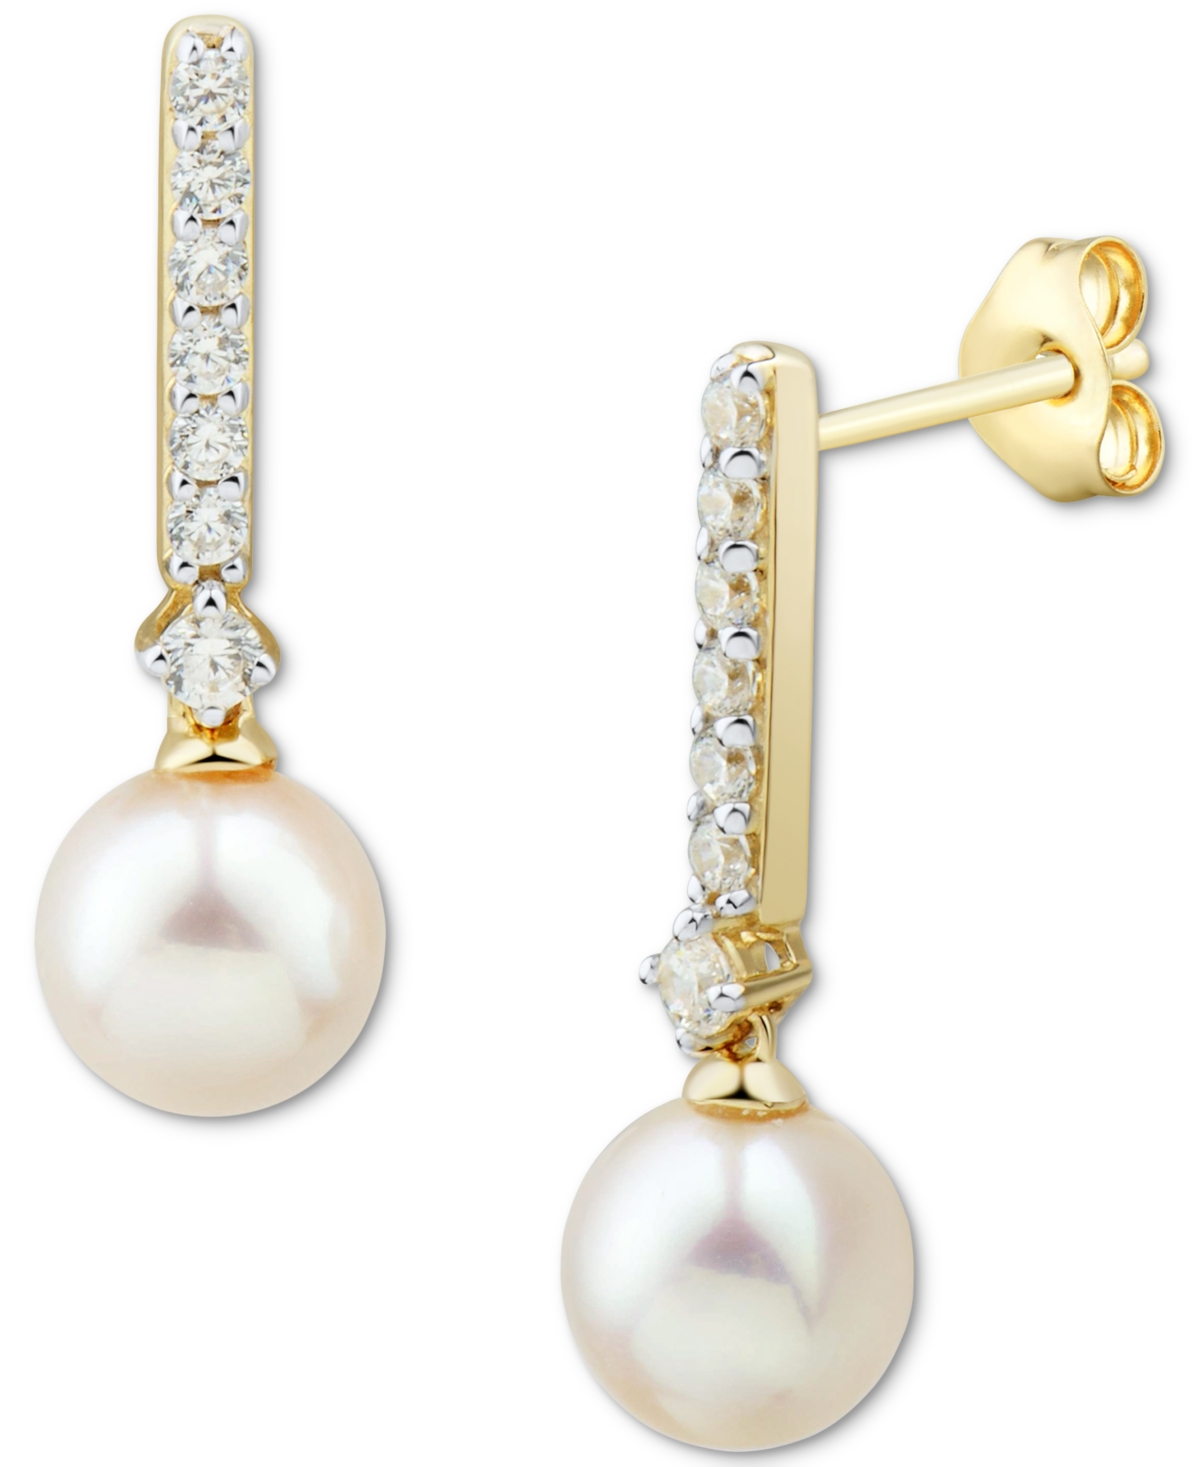 Honora Cultured Freshwater Pearl (6mm) & Diamond (1/5 ct. t.w.) Drop Earrings in 14k Yellow Gold (Also in White Gold)